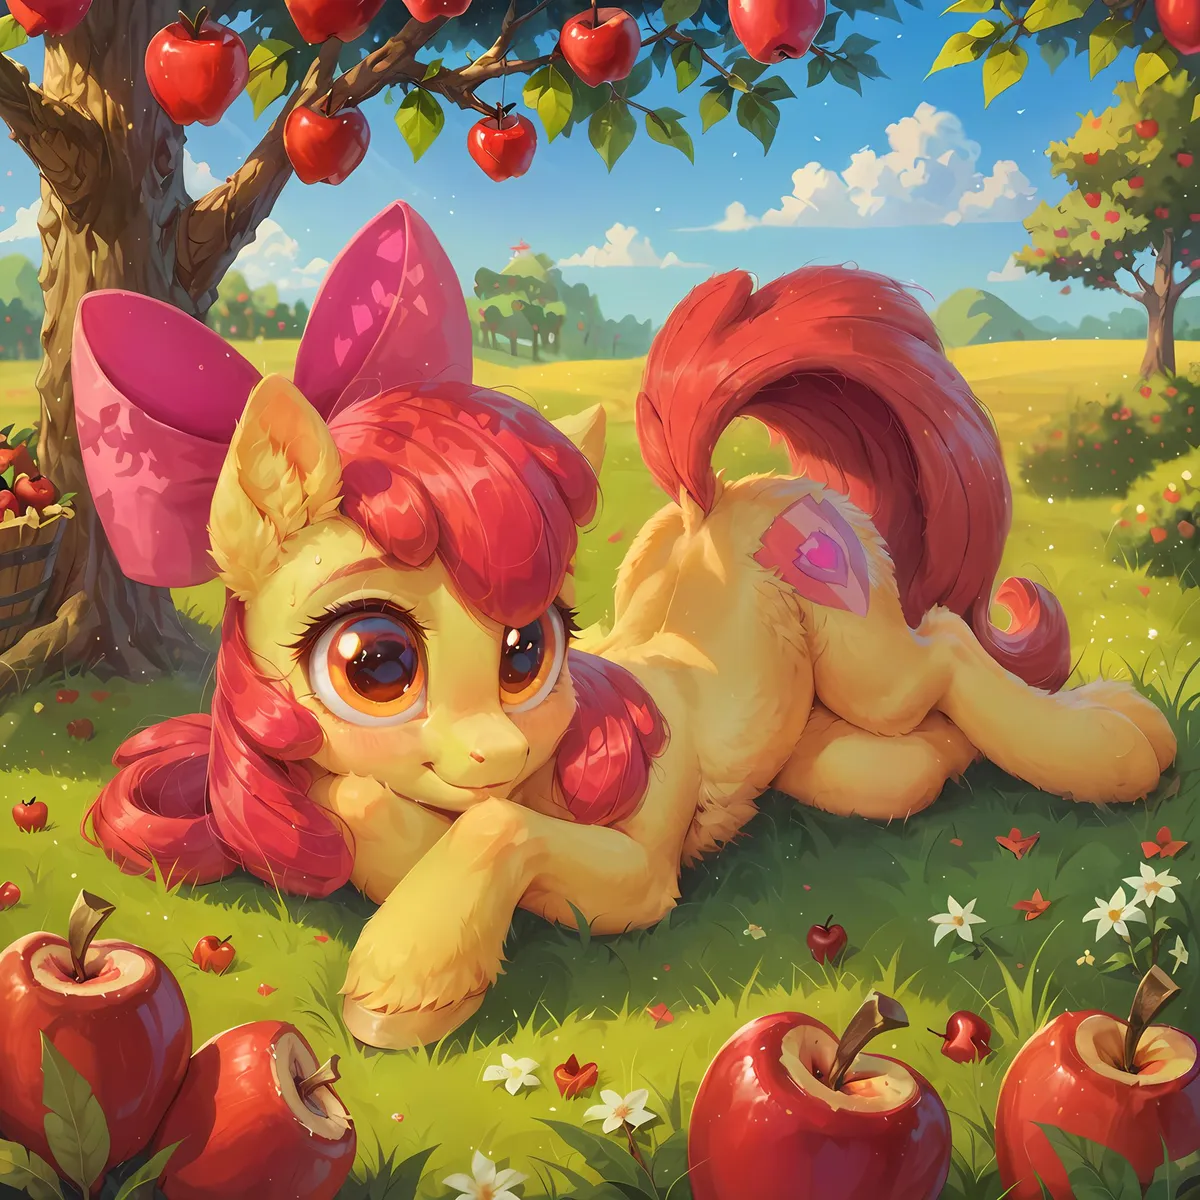 A cute AI-generated pony with a large pink bow, lying on the grass in an apple orchard created using Stable Diffusion.